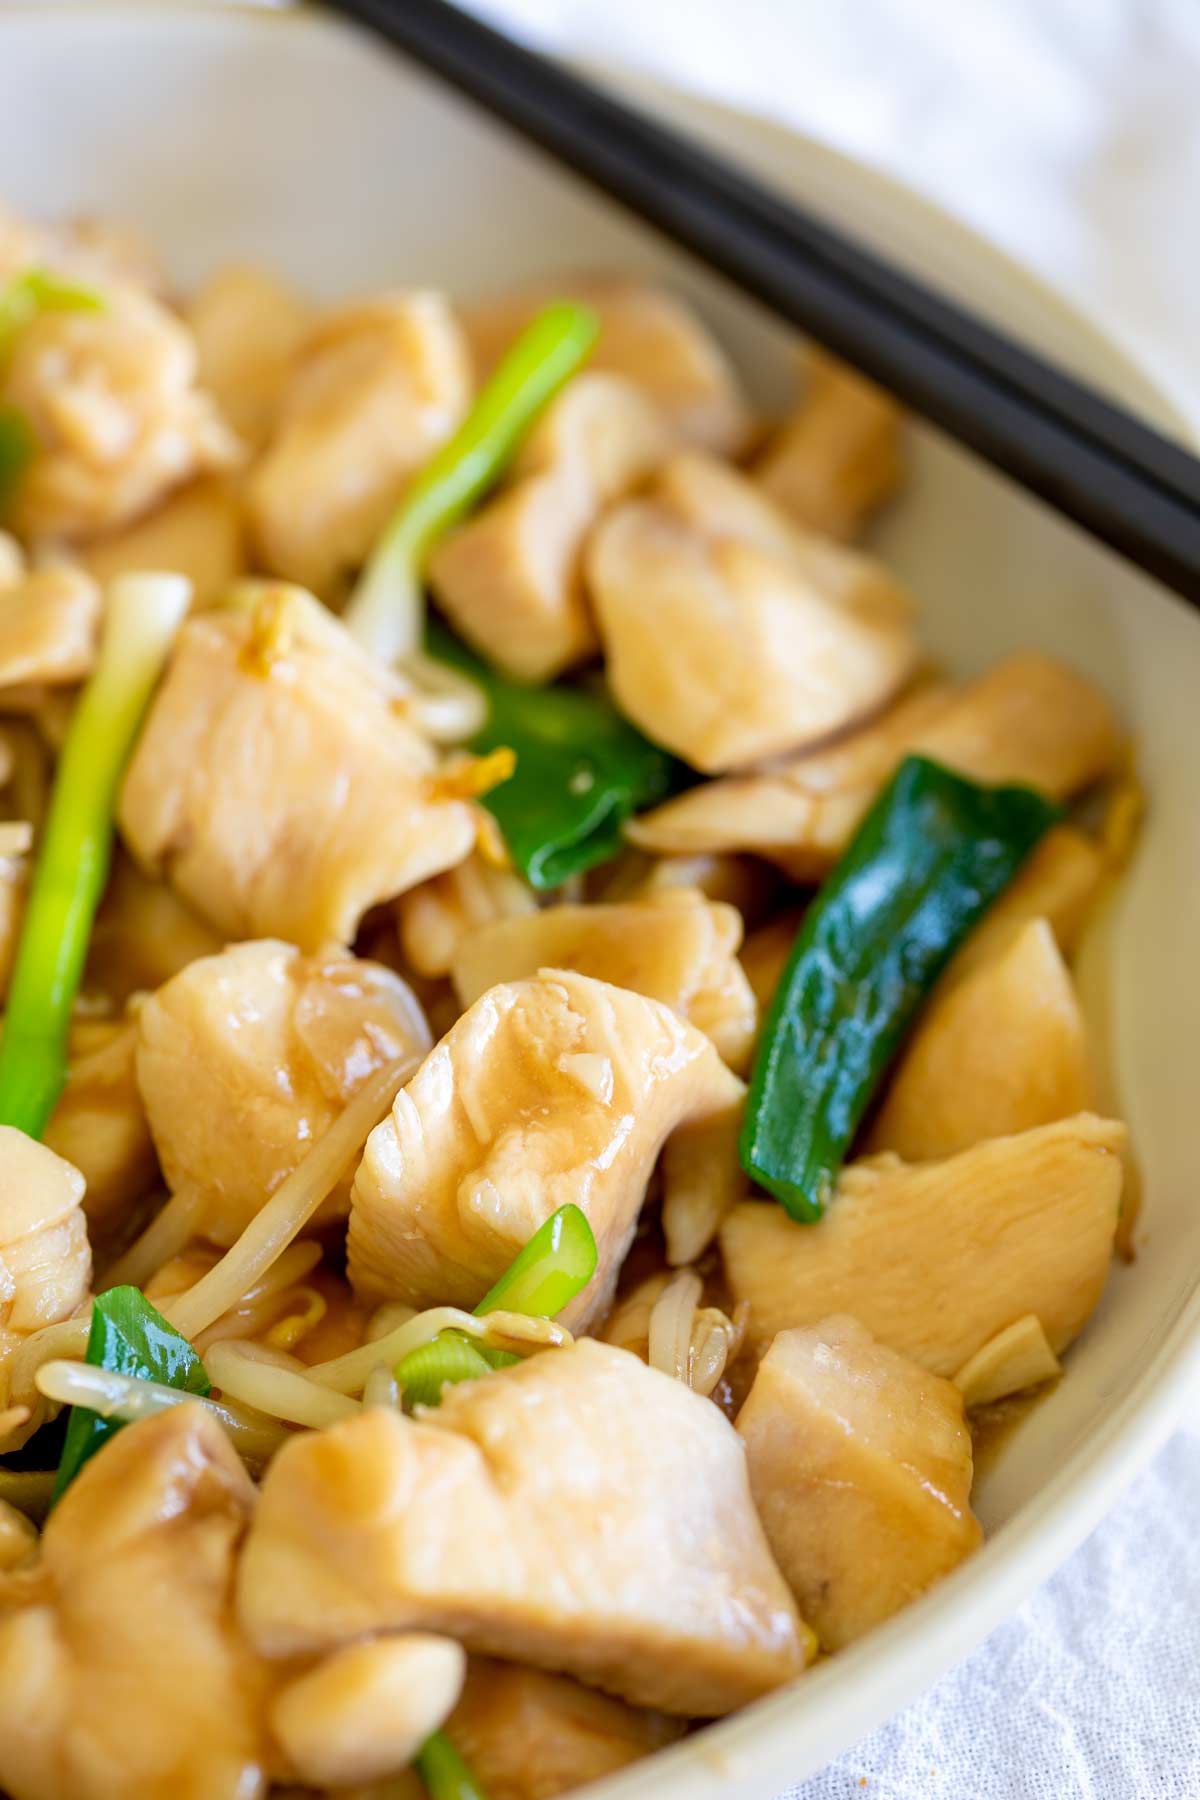 Chicken, garlic beansprouts and green onions in a white bowl with garlic sauce